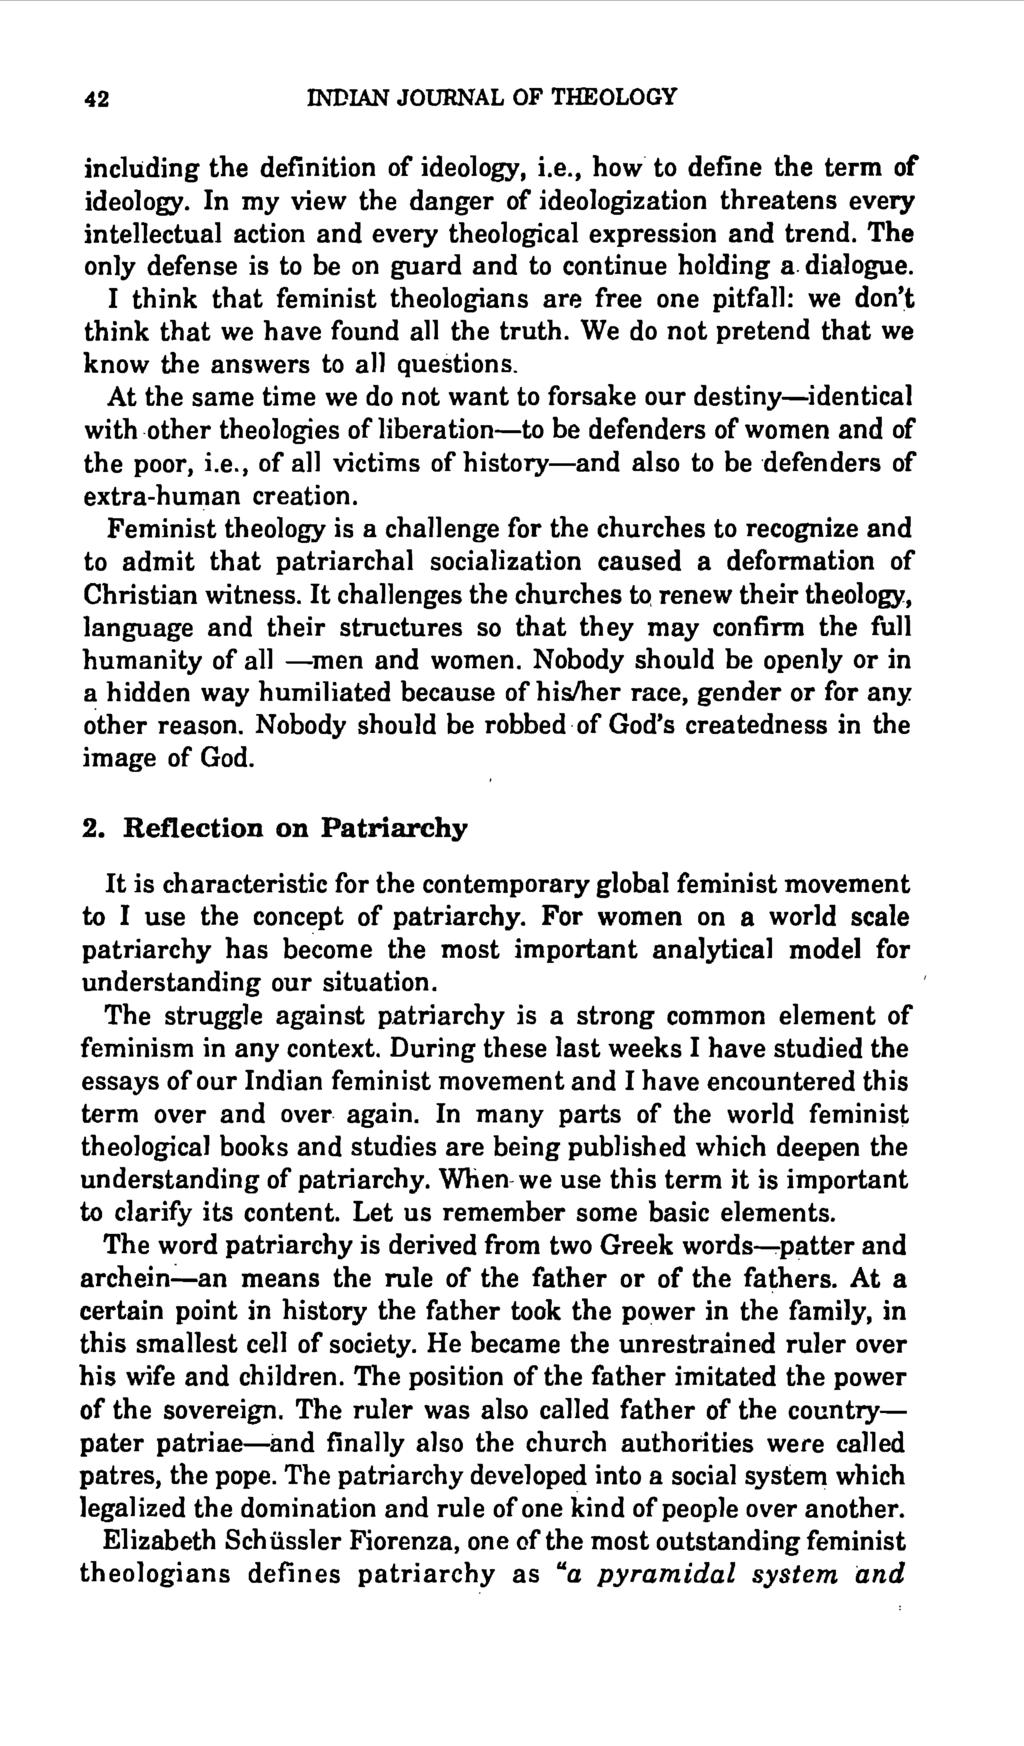 42 INDIAN JOURNAL OF THEOLOGY including the definition of ideology, i.e., how to define the term of ideology.